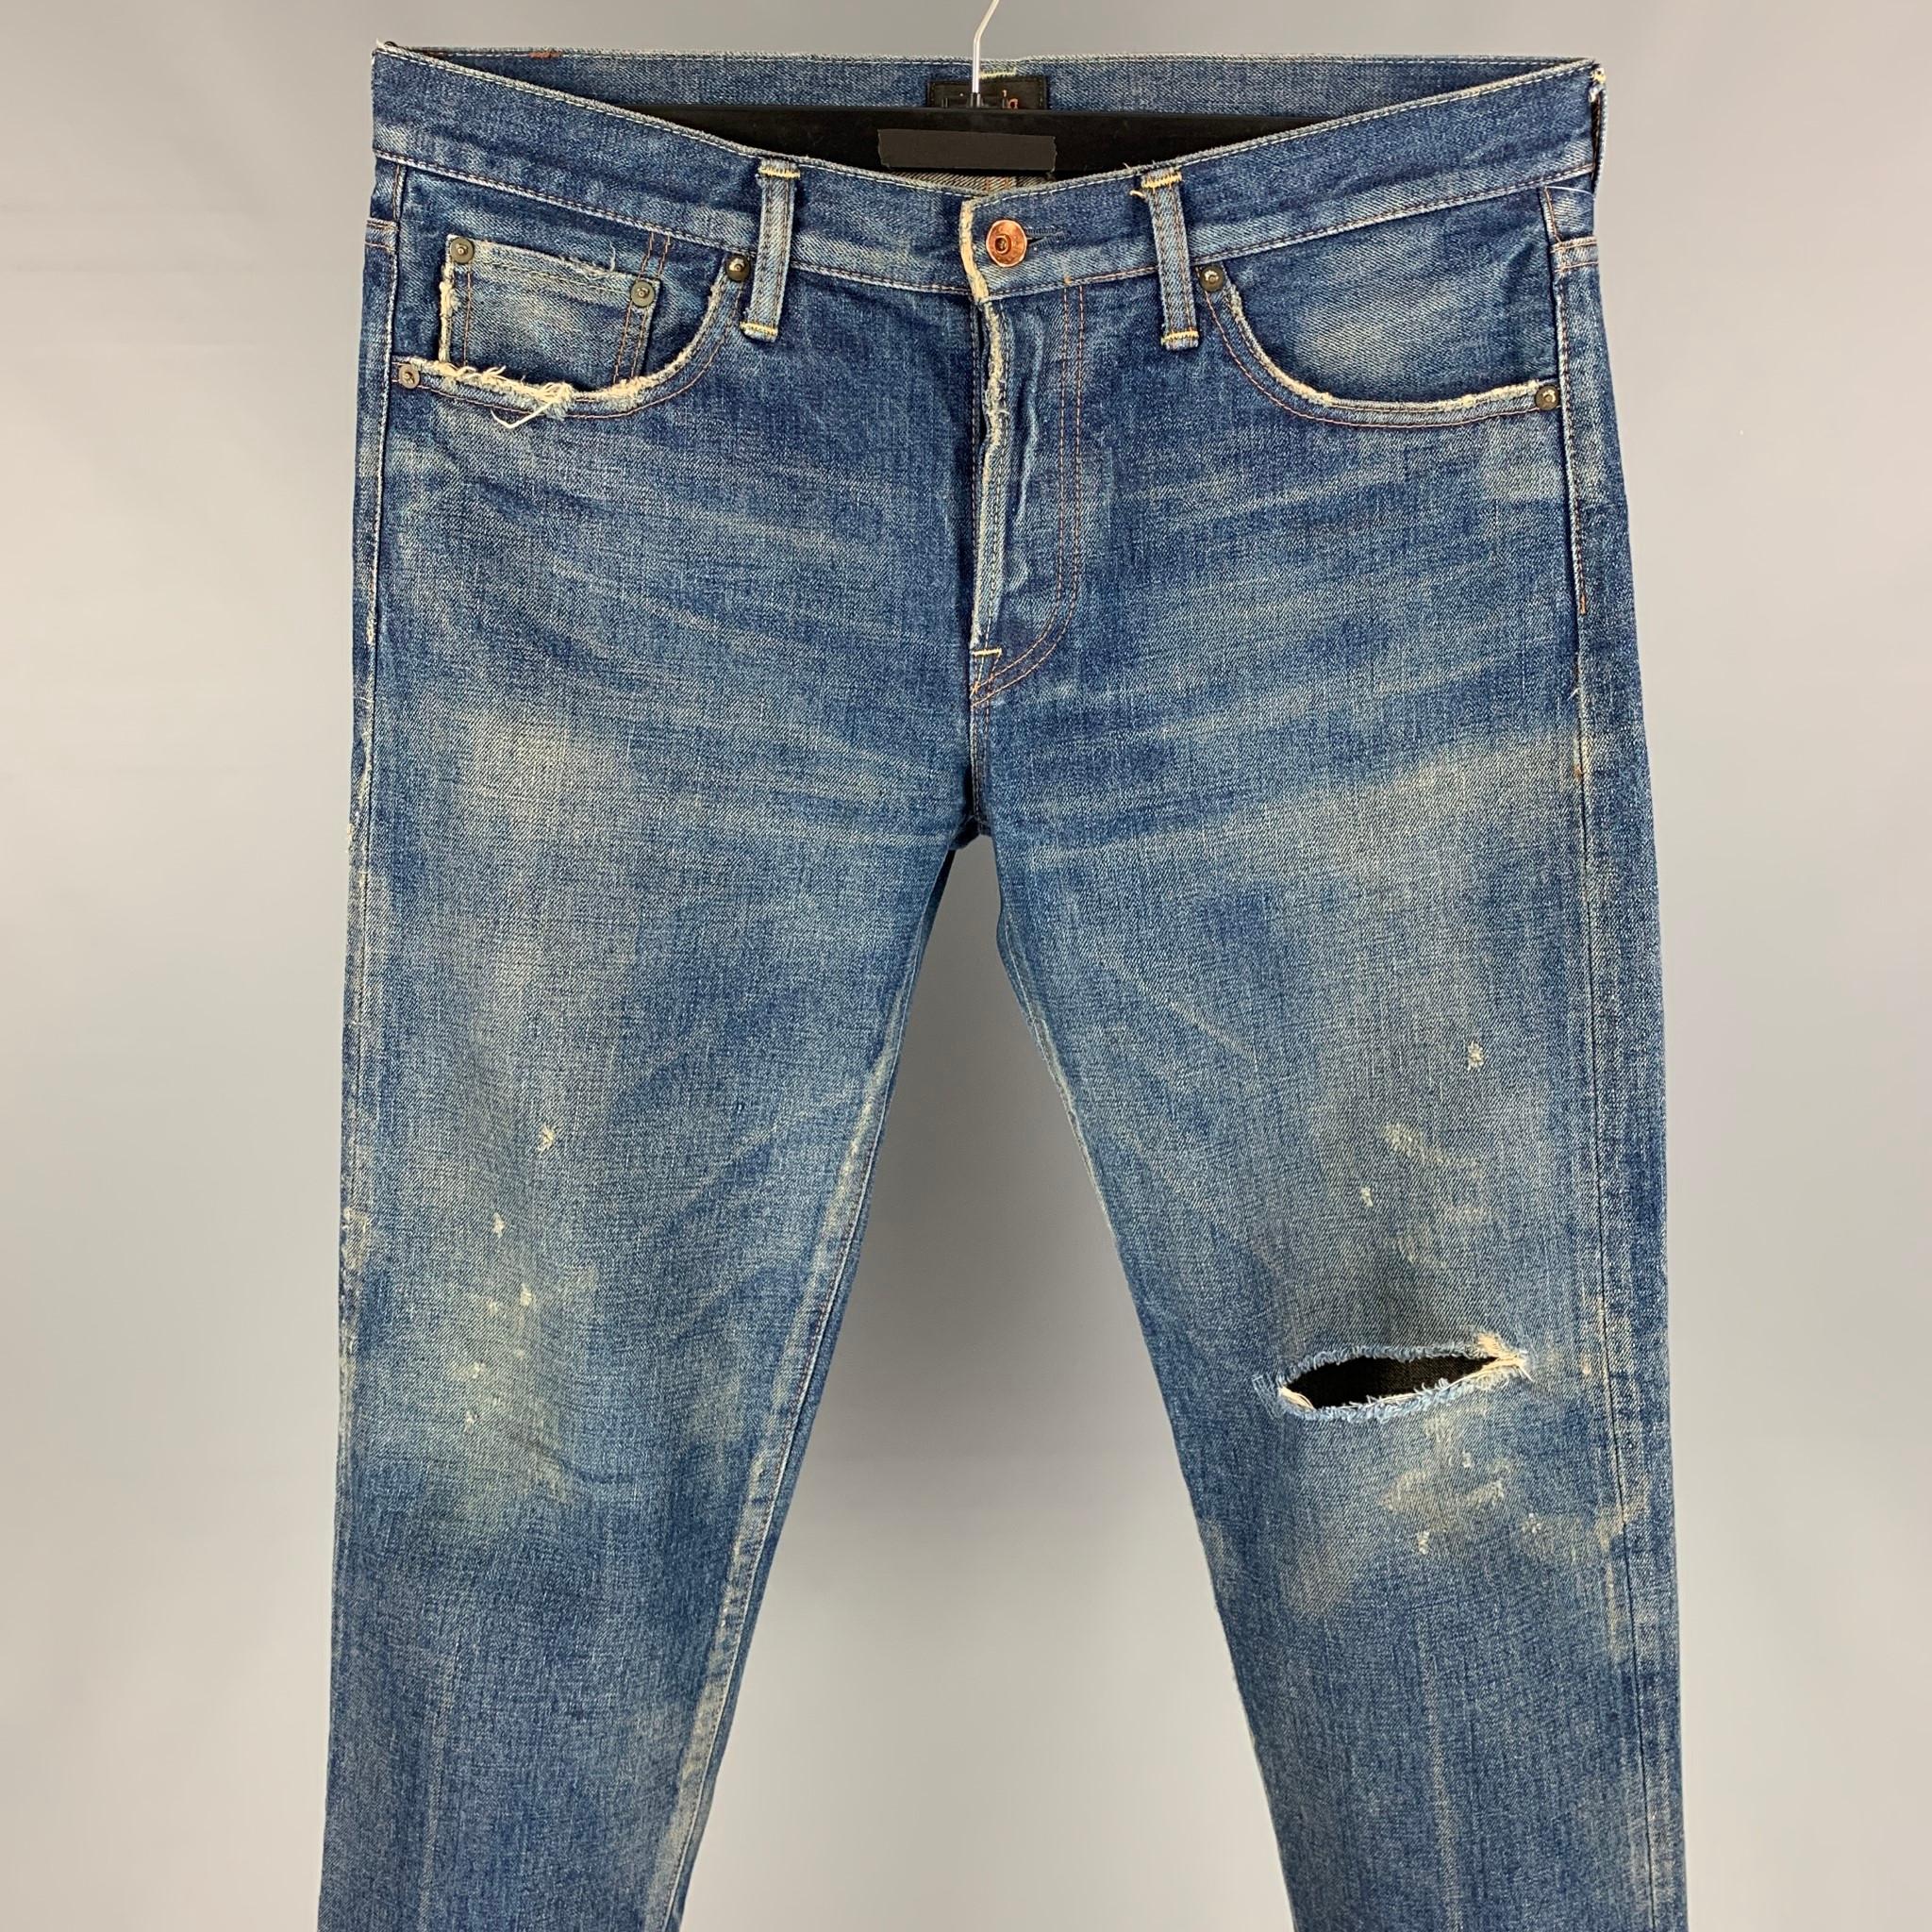 CHIMALA jeans comes in a indigo wash selvedge denim featuring a regular fit, distressed, raw edge, contrast stitching, and a button fly closure. Made in Japan. 

Good Pre-Owned Condition.
Marked: 31

Measurements:

Waist: 34 in.
Rise: 10.5